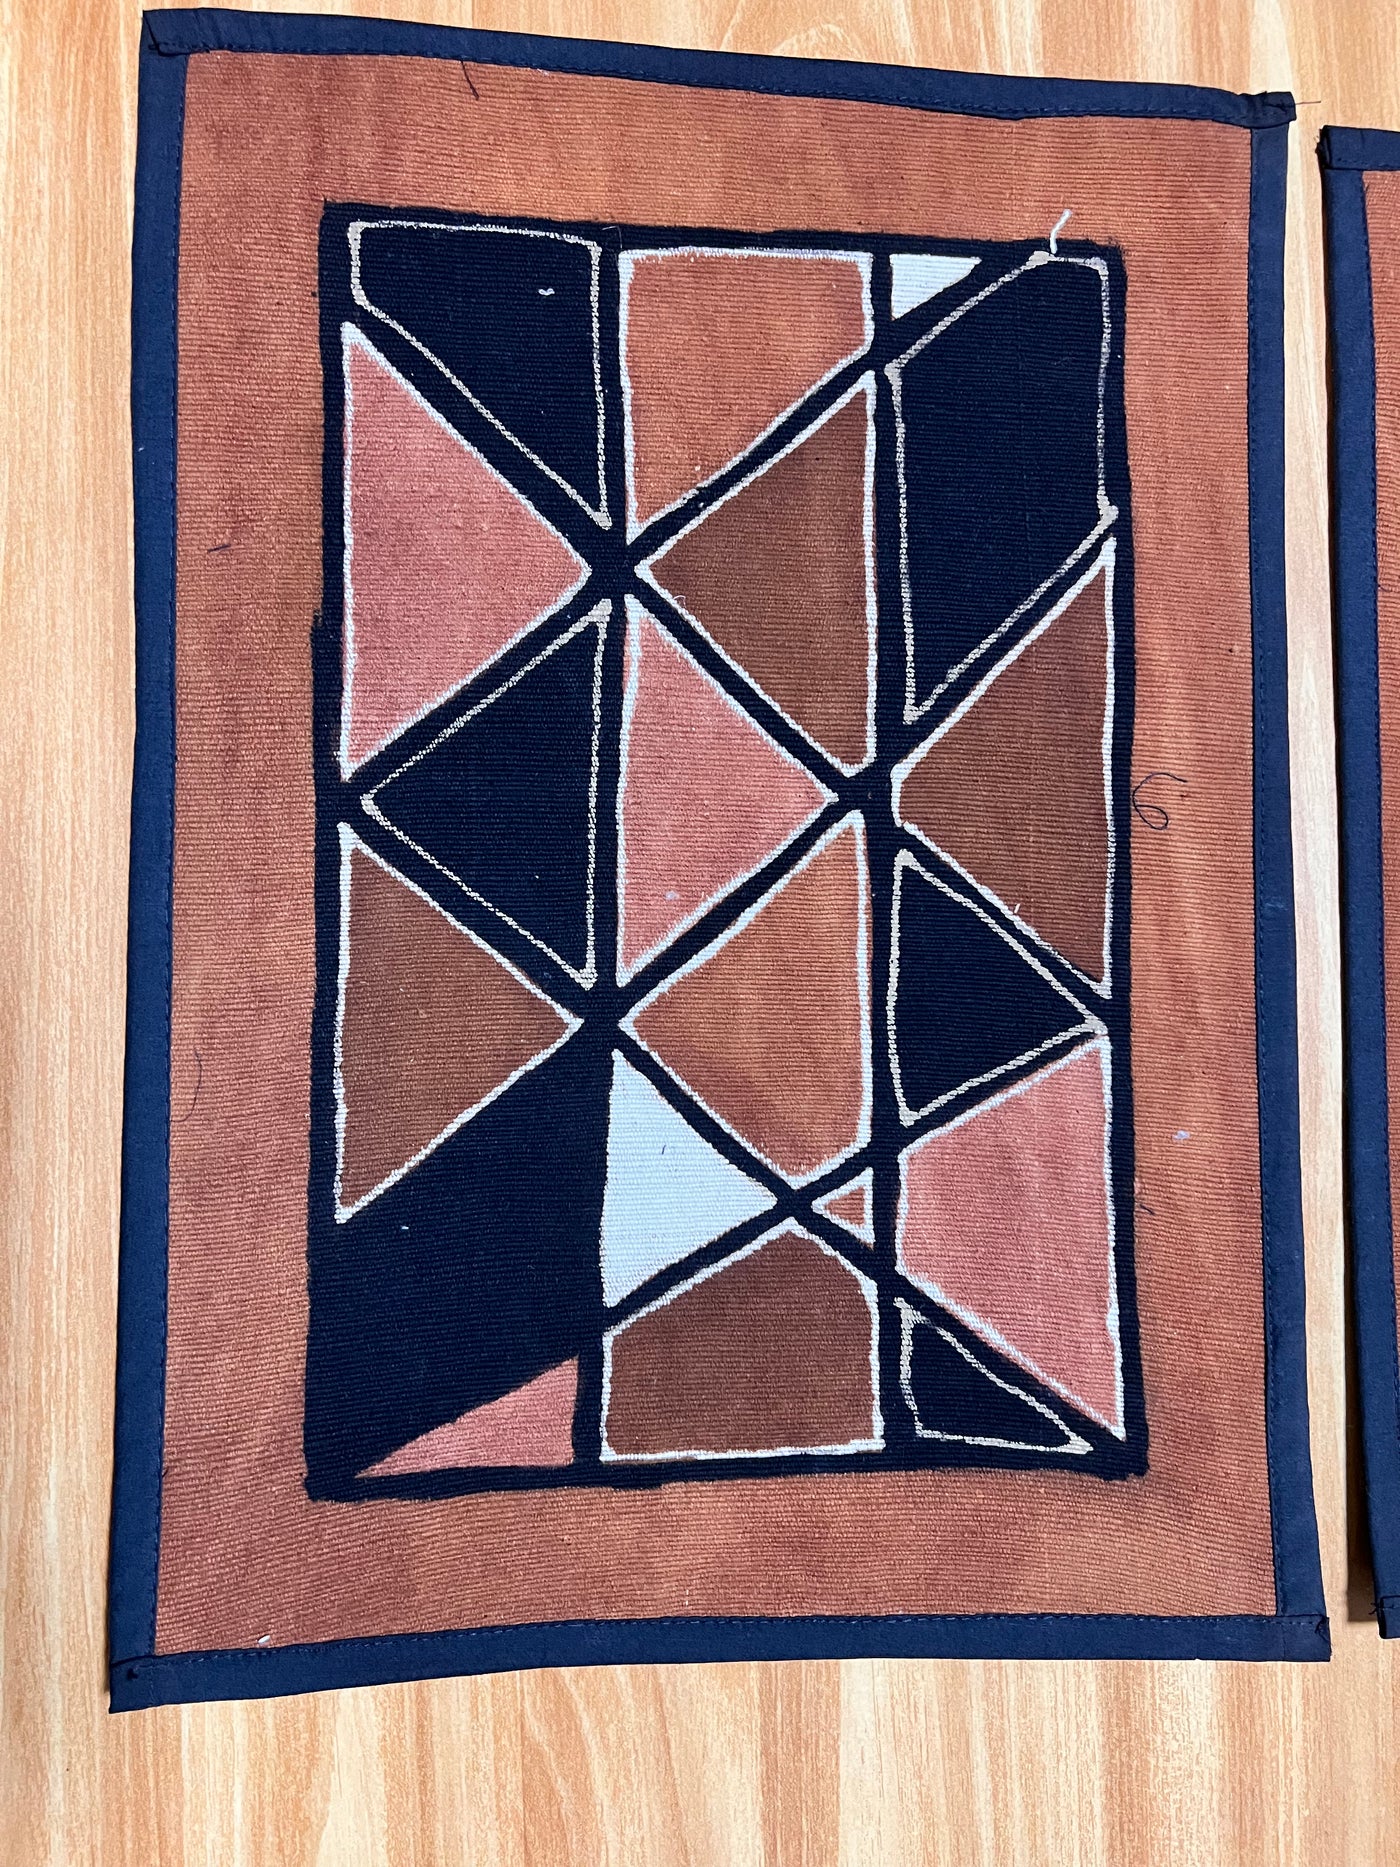 "Natural Plant-Dyed Mudcloth Placemats from Mali"